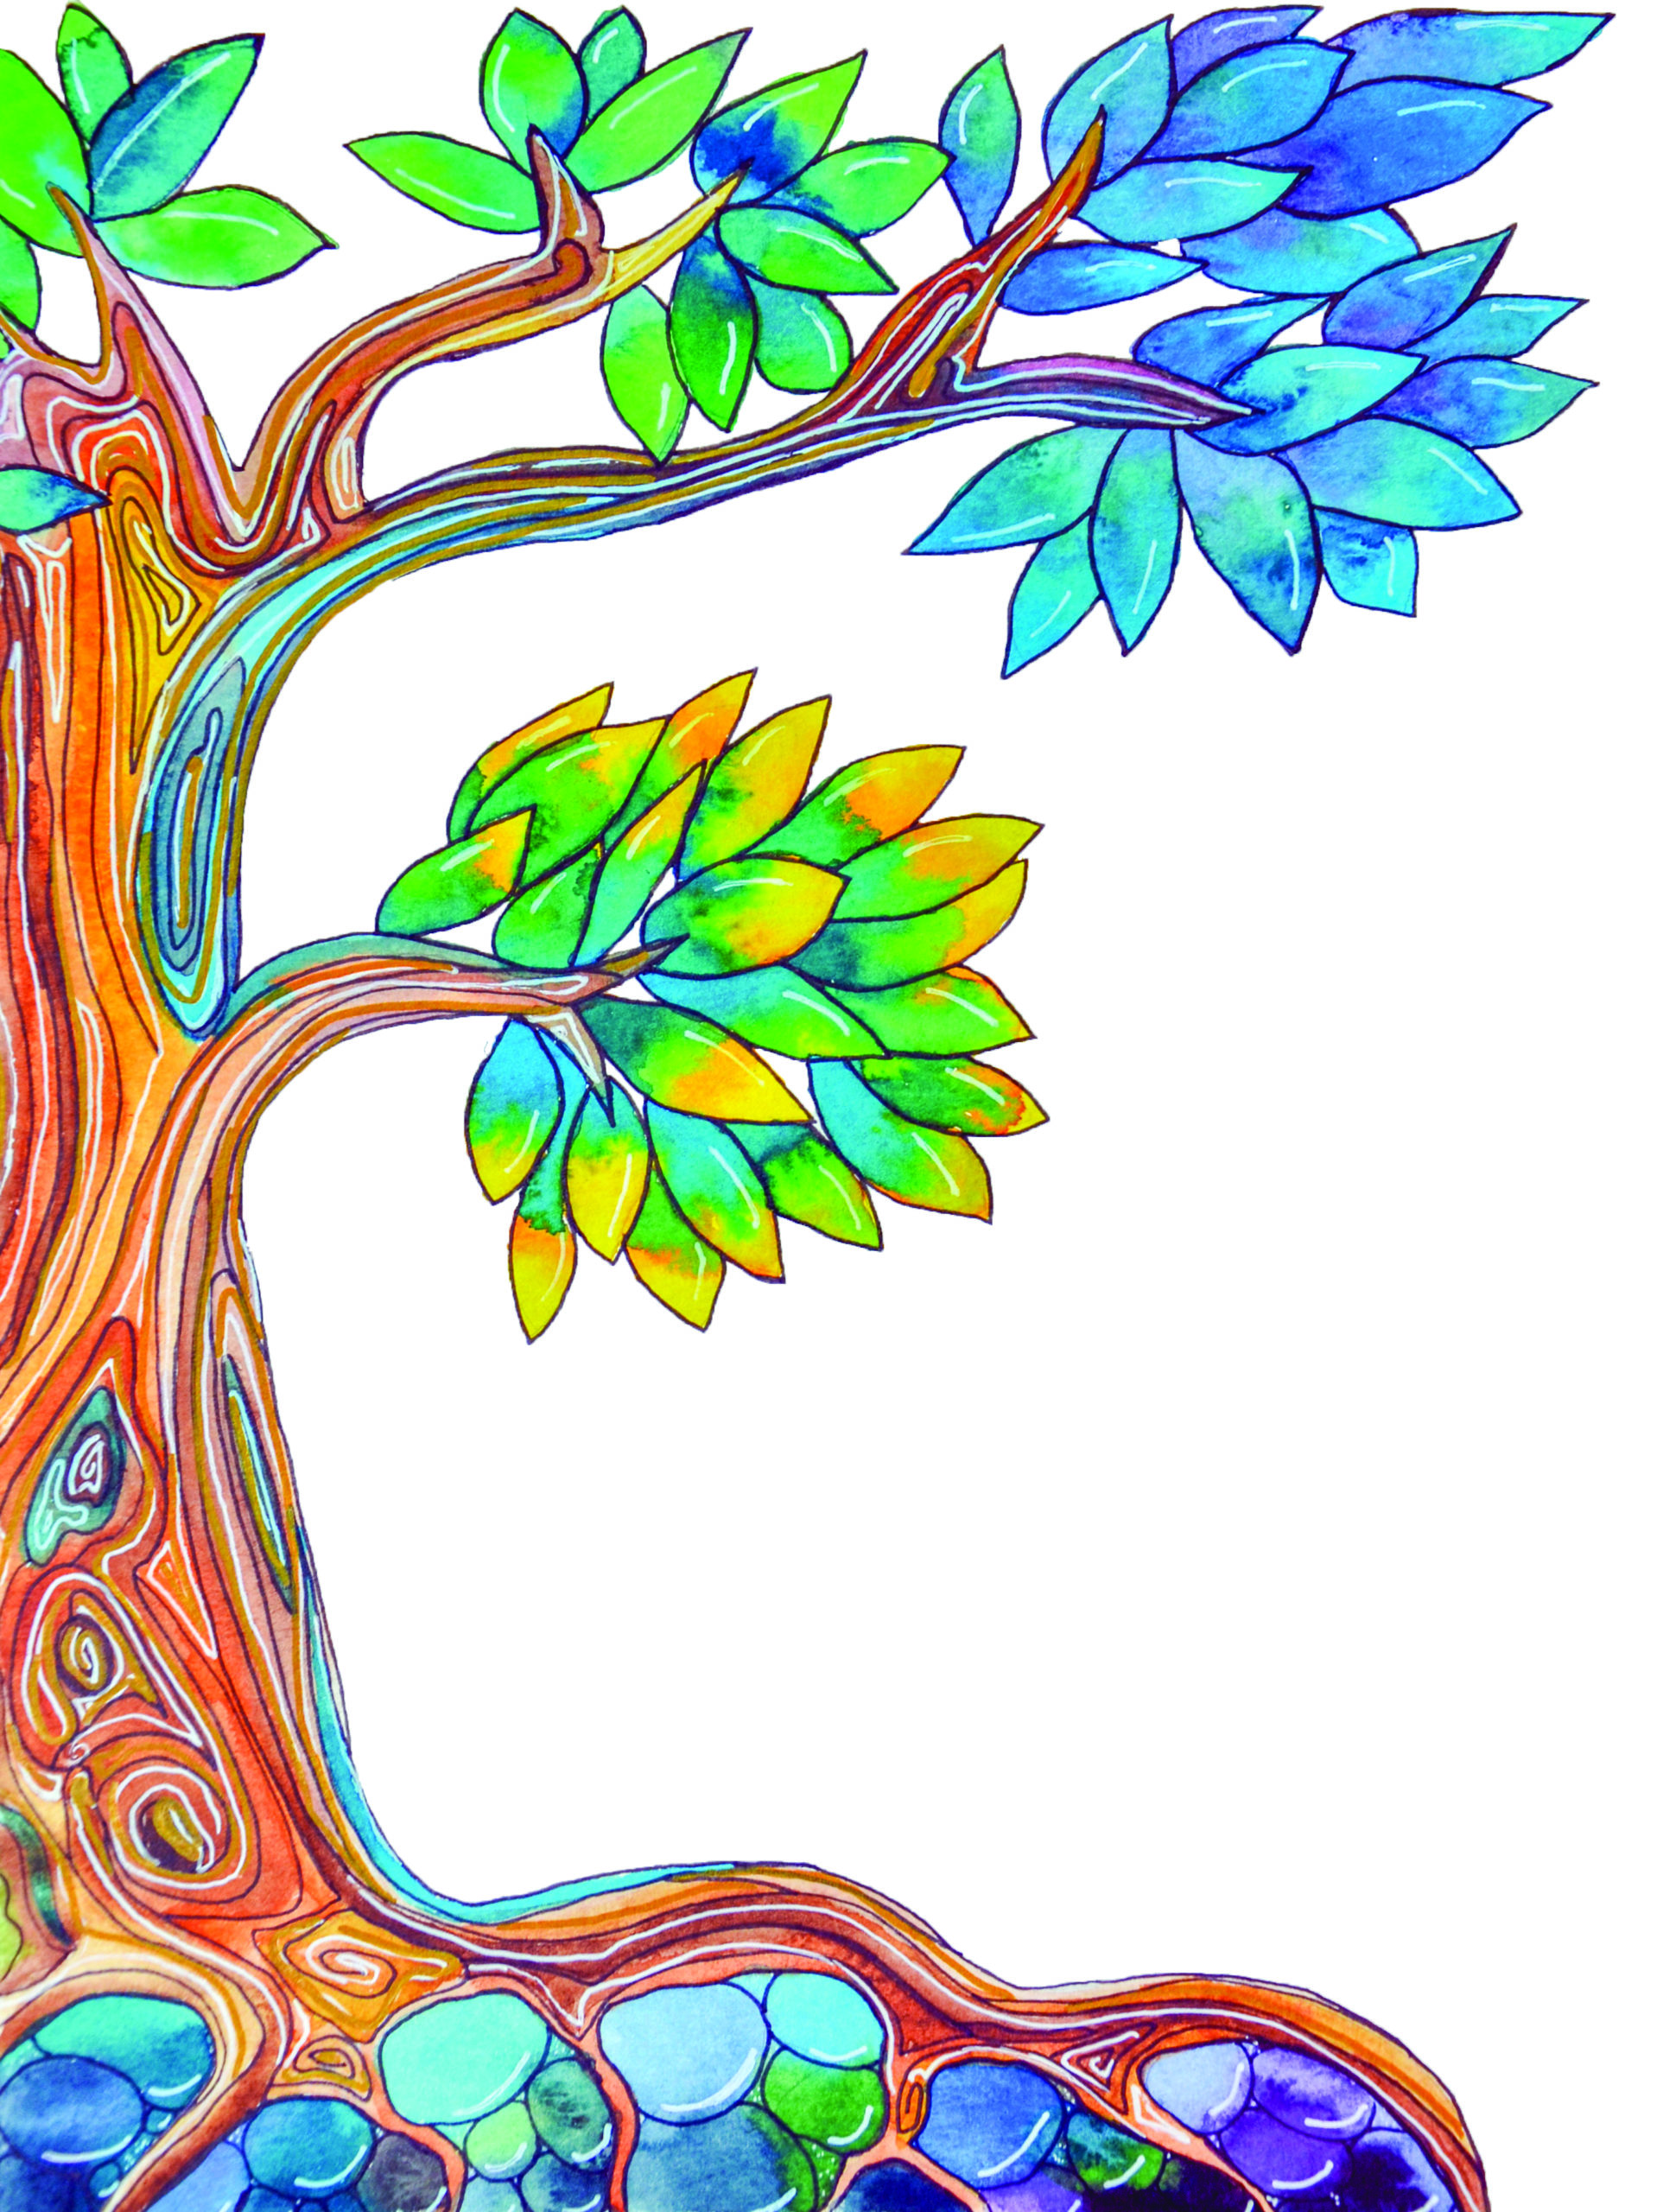 Watercolor drawn illustration of a peaceful tree in beautiful green, blue and yellow tones on white